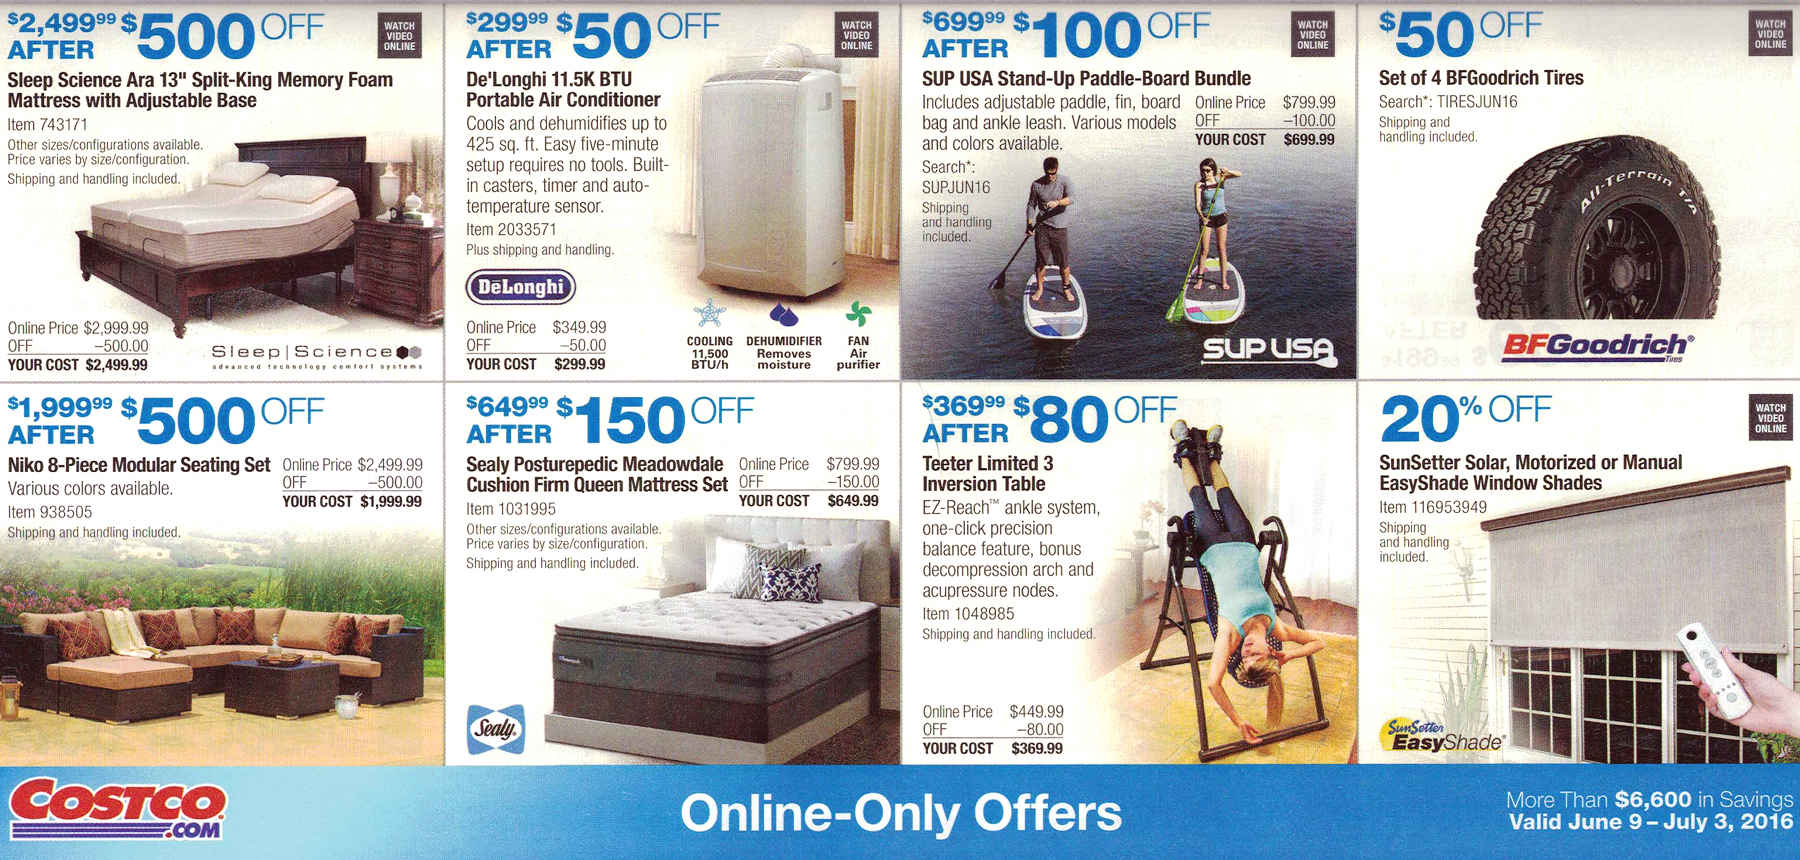 Coupon book full size page -> 13 <-